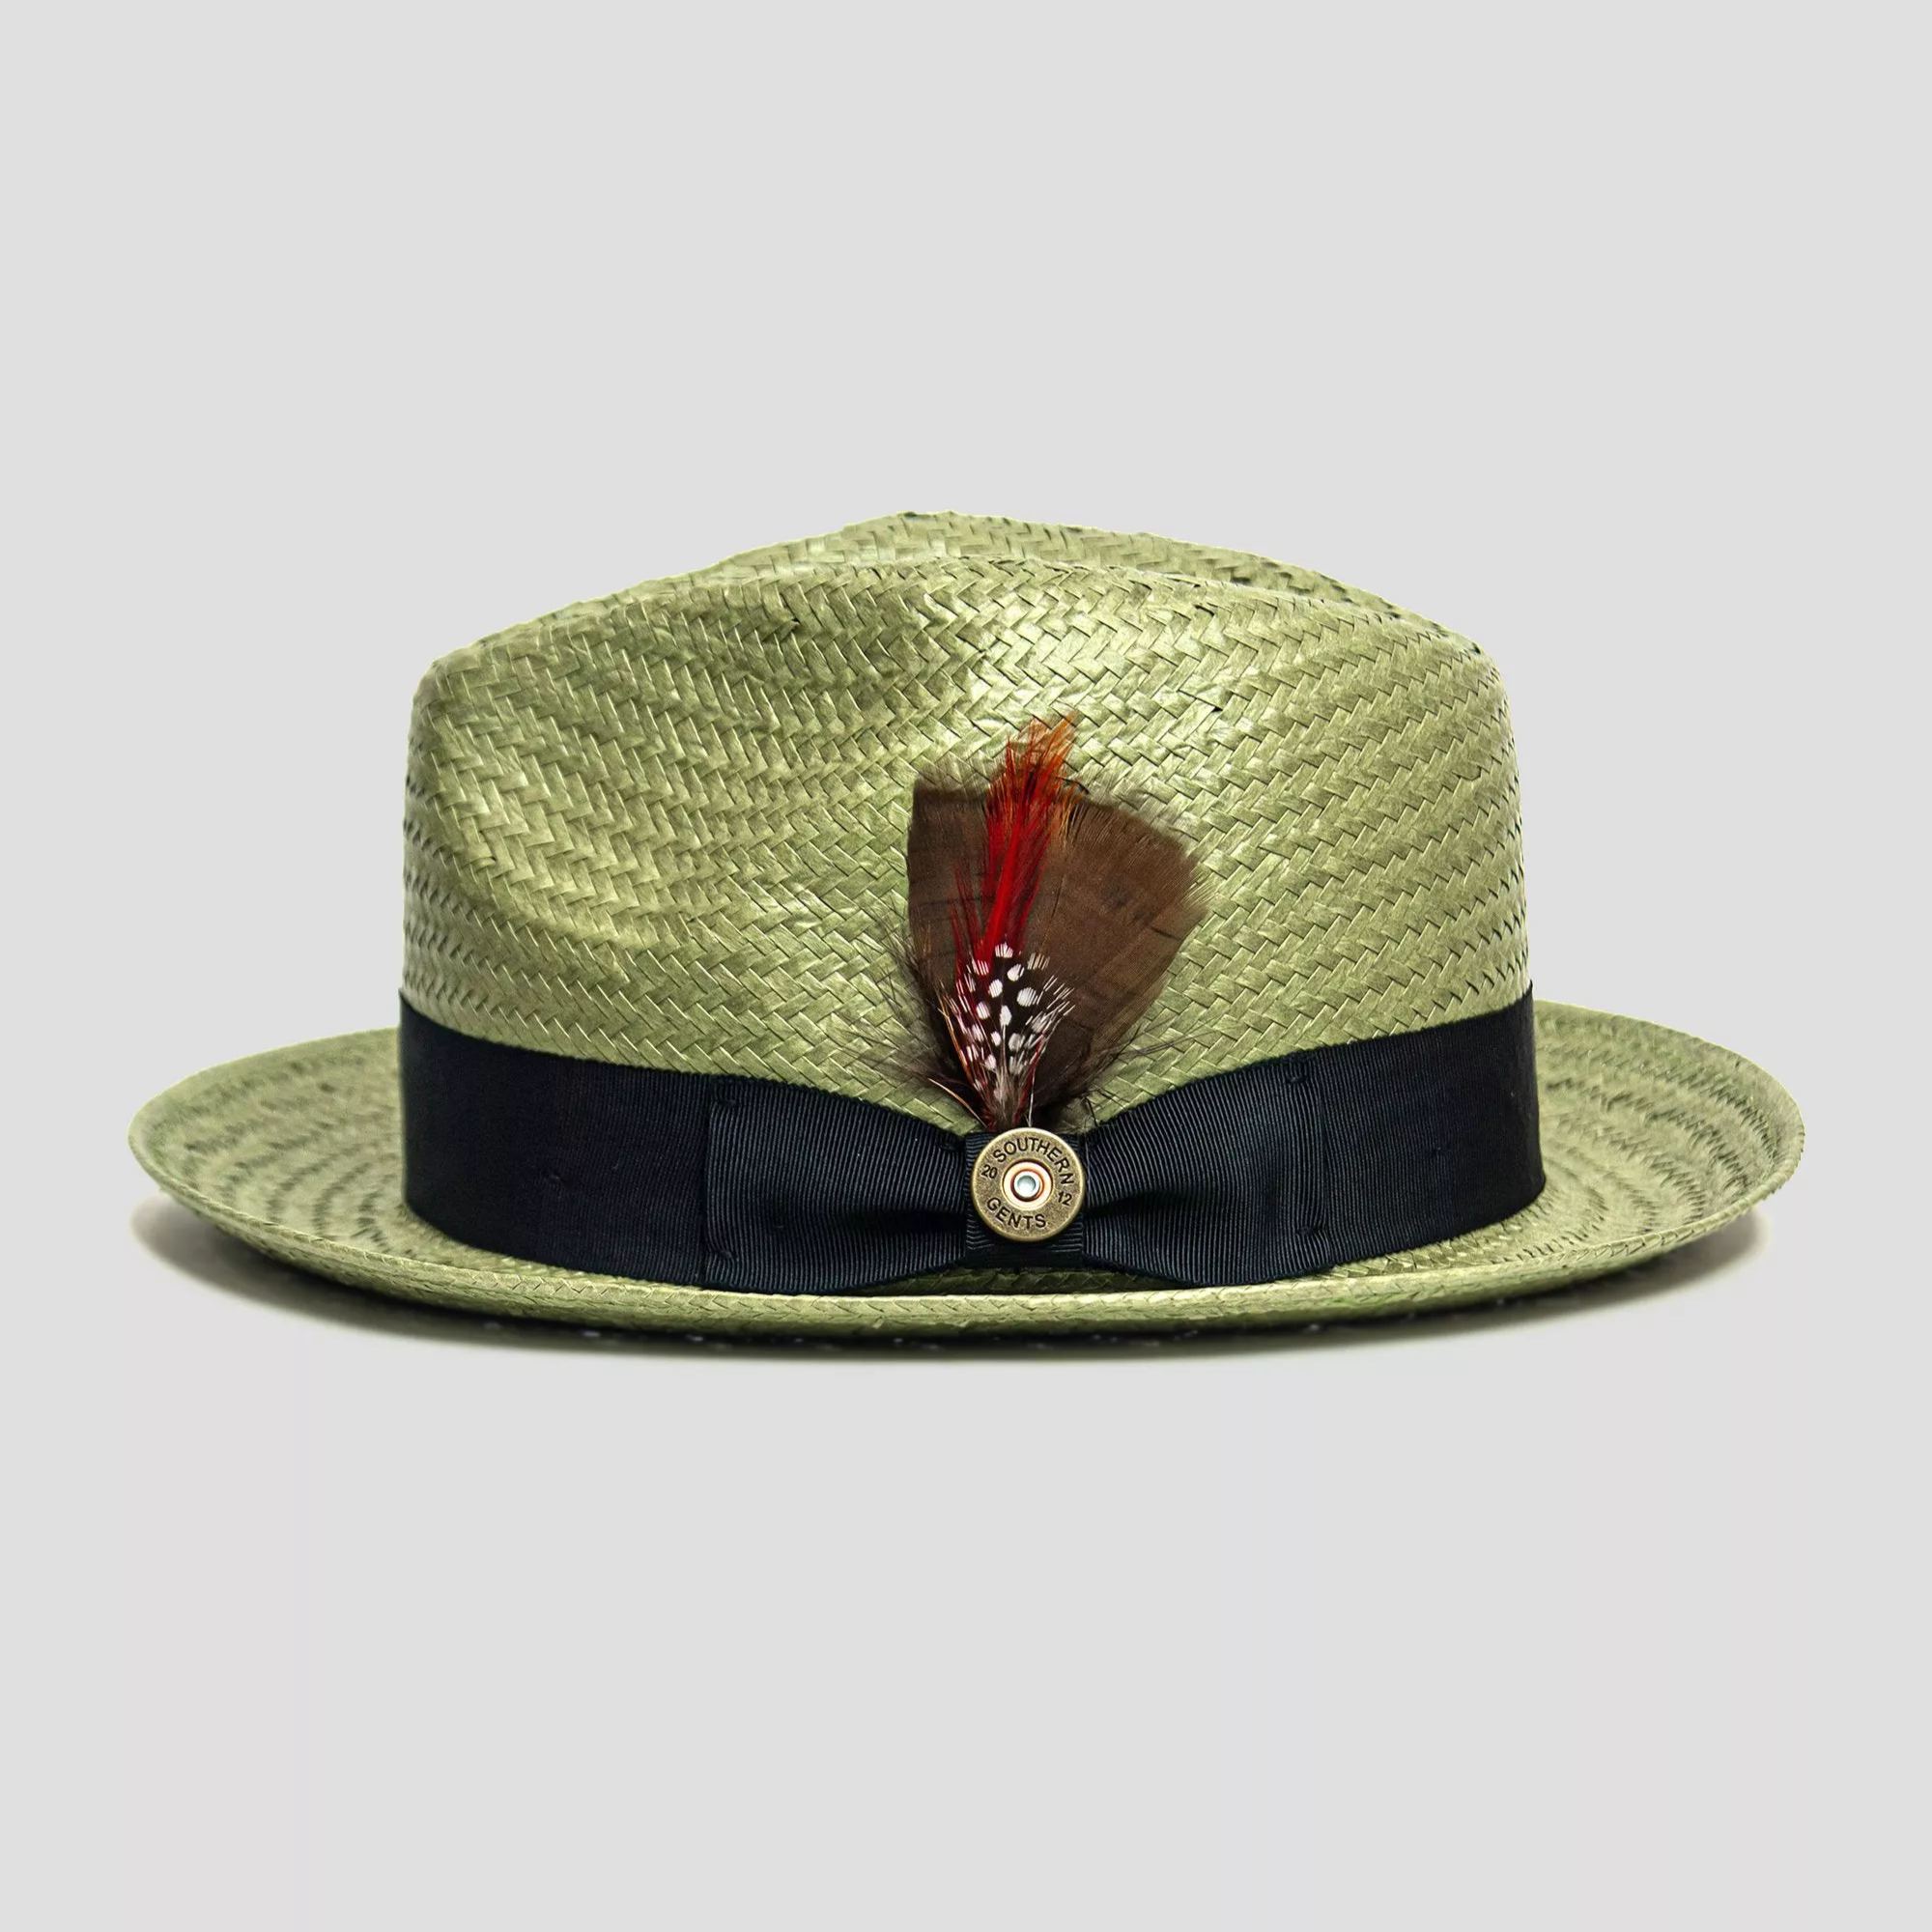 Miller Ranch Straw Trilby Fedora - Avocado[Fast shipping and box packing]